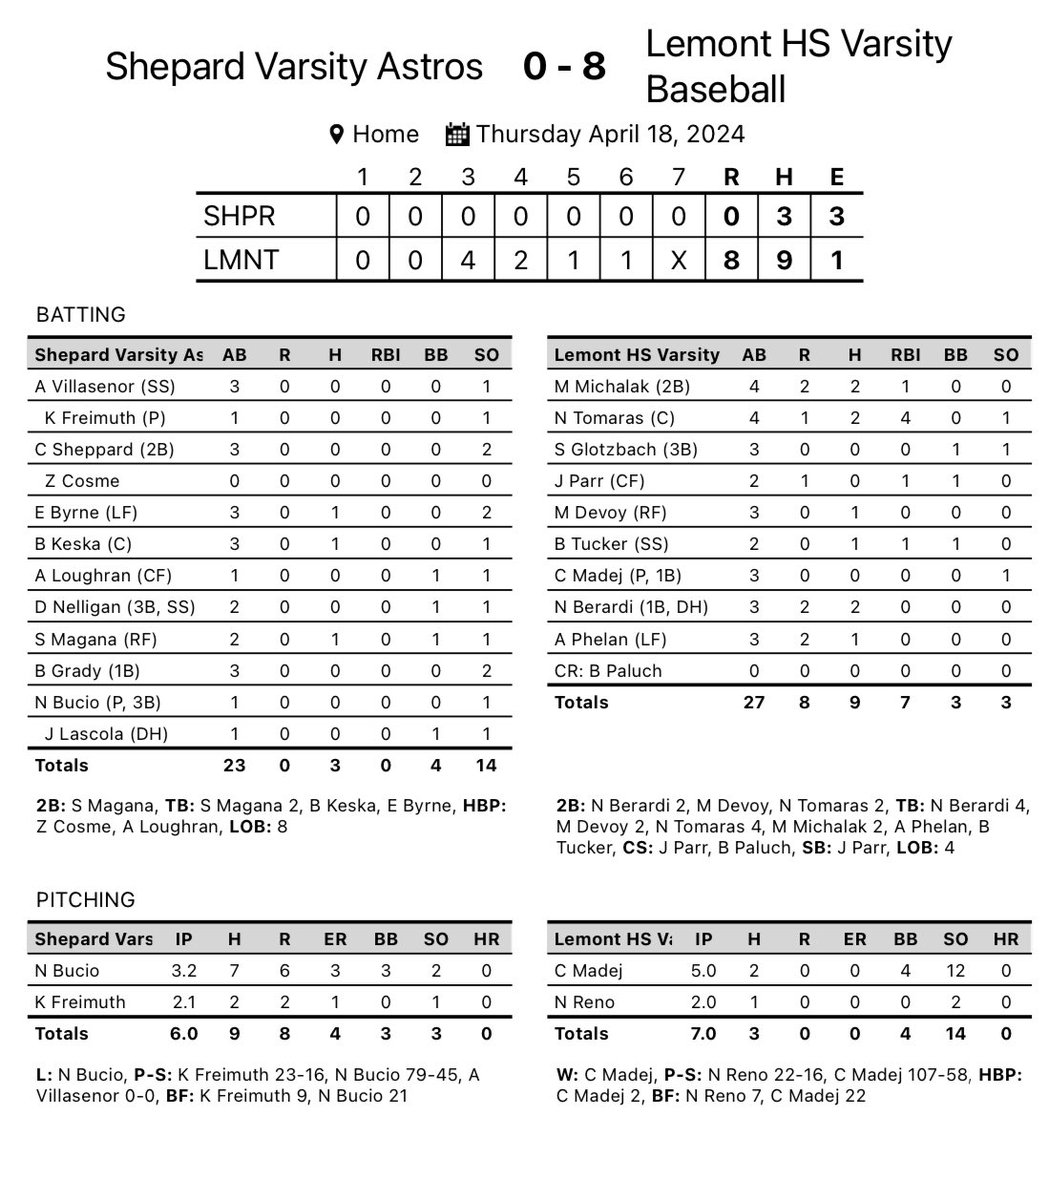 Solid team win today! Way to come to play. Let’s keep it rolling. @CannonMadej49 5IP 2H 4BB 2HBP 12K @Nick91224284 2IP 1H 2K N. Berardi 2-3 2-2b @NoahTomaras 2-4 2-2b 4RBI @MaxMichalak_ 2-4 RBI